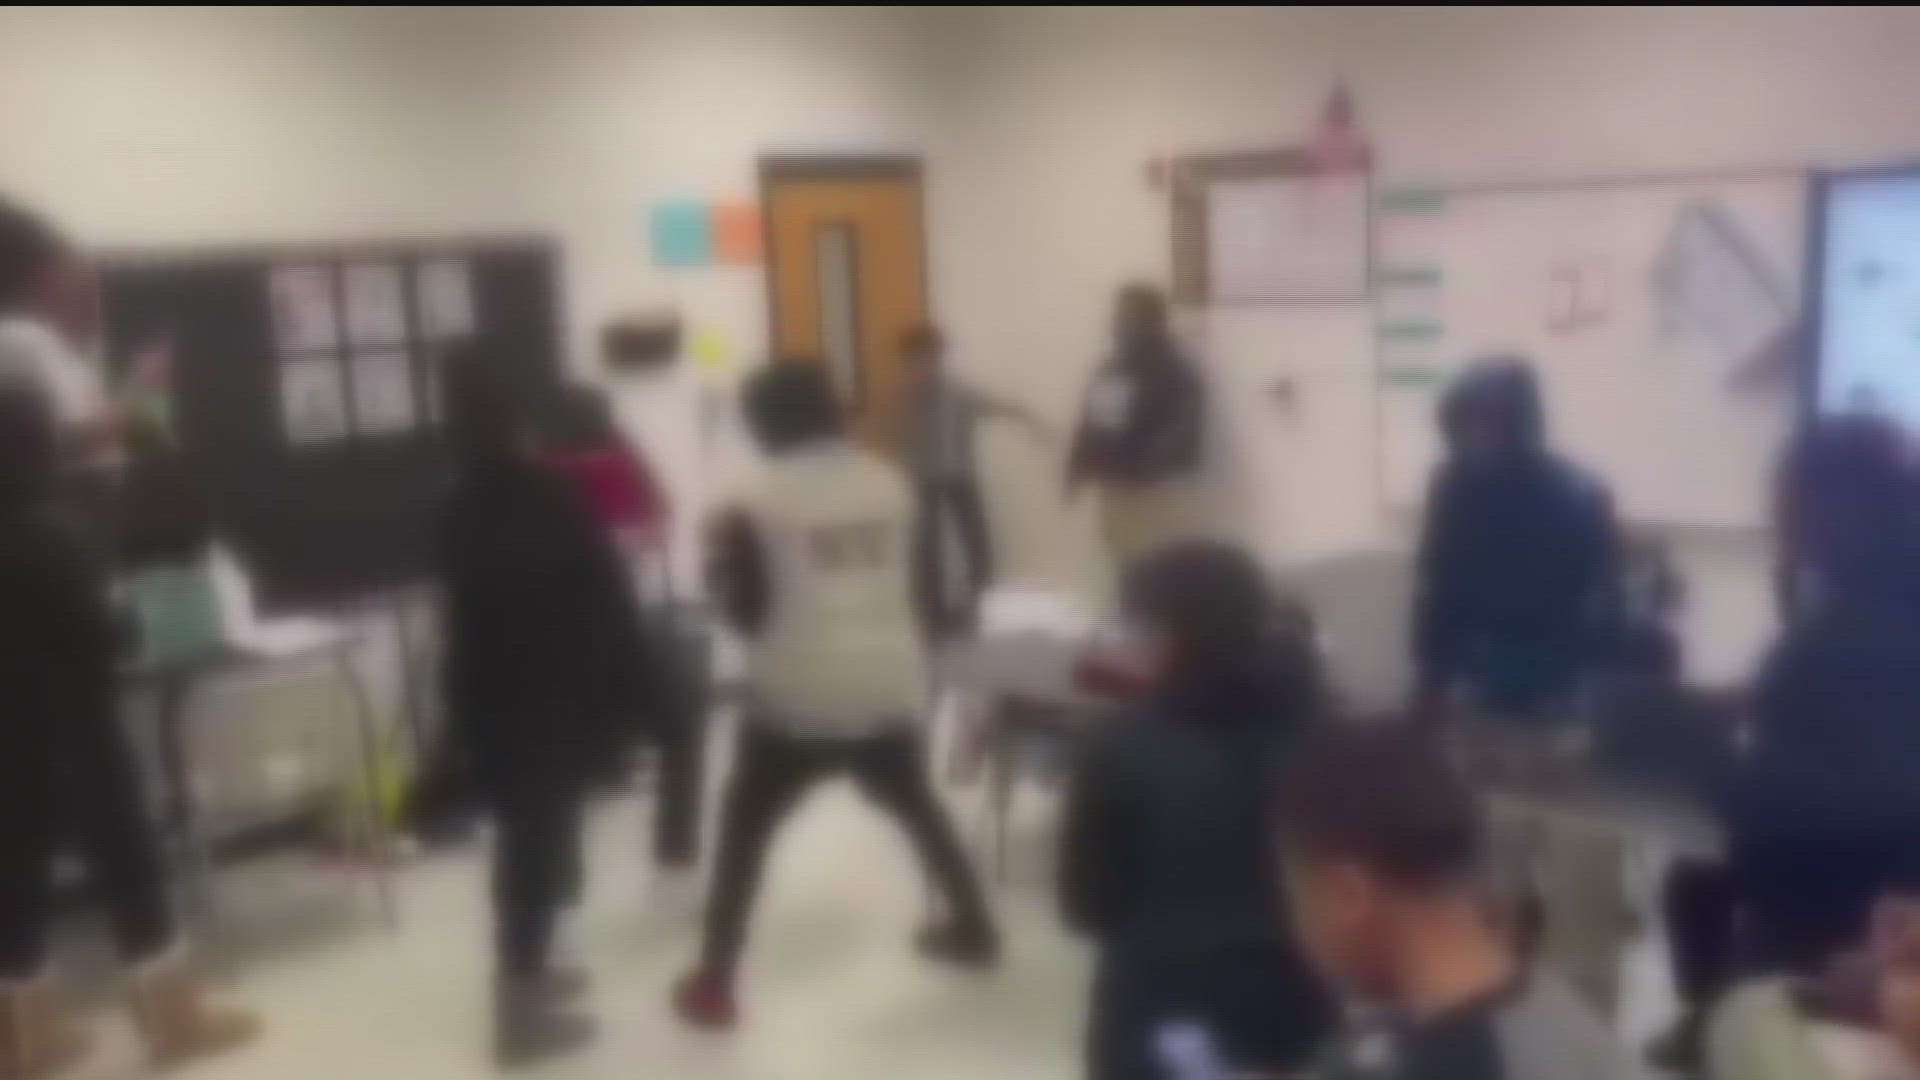 Viral videos appear to show Clayton County middle school students brawling in the classroom.